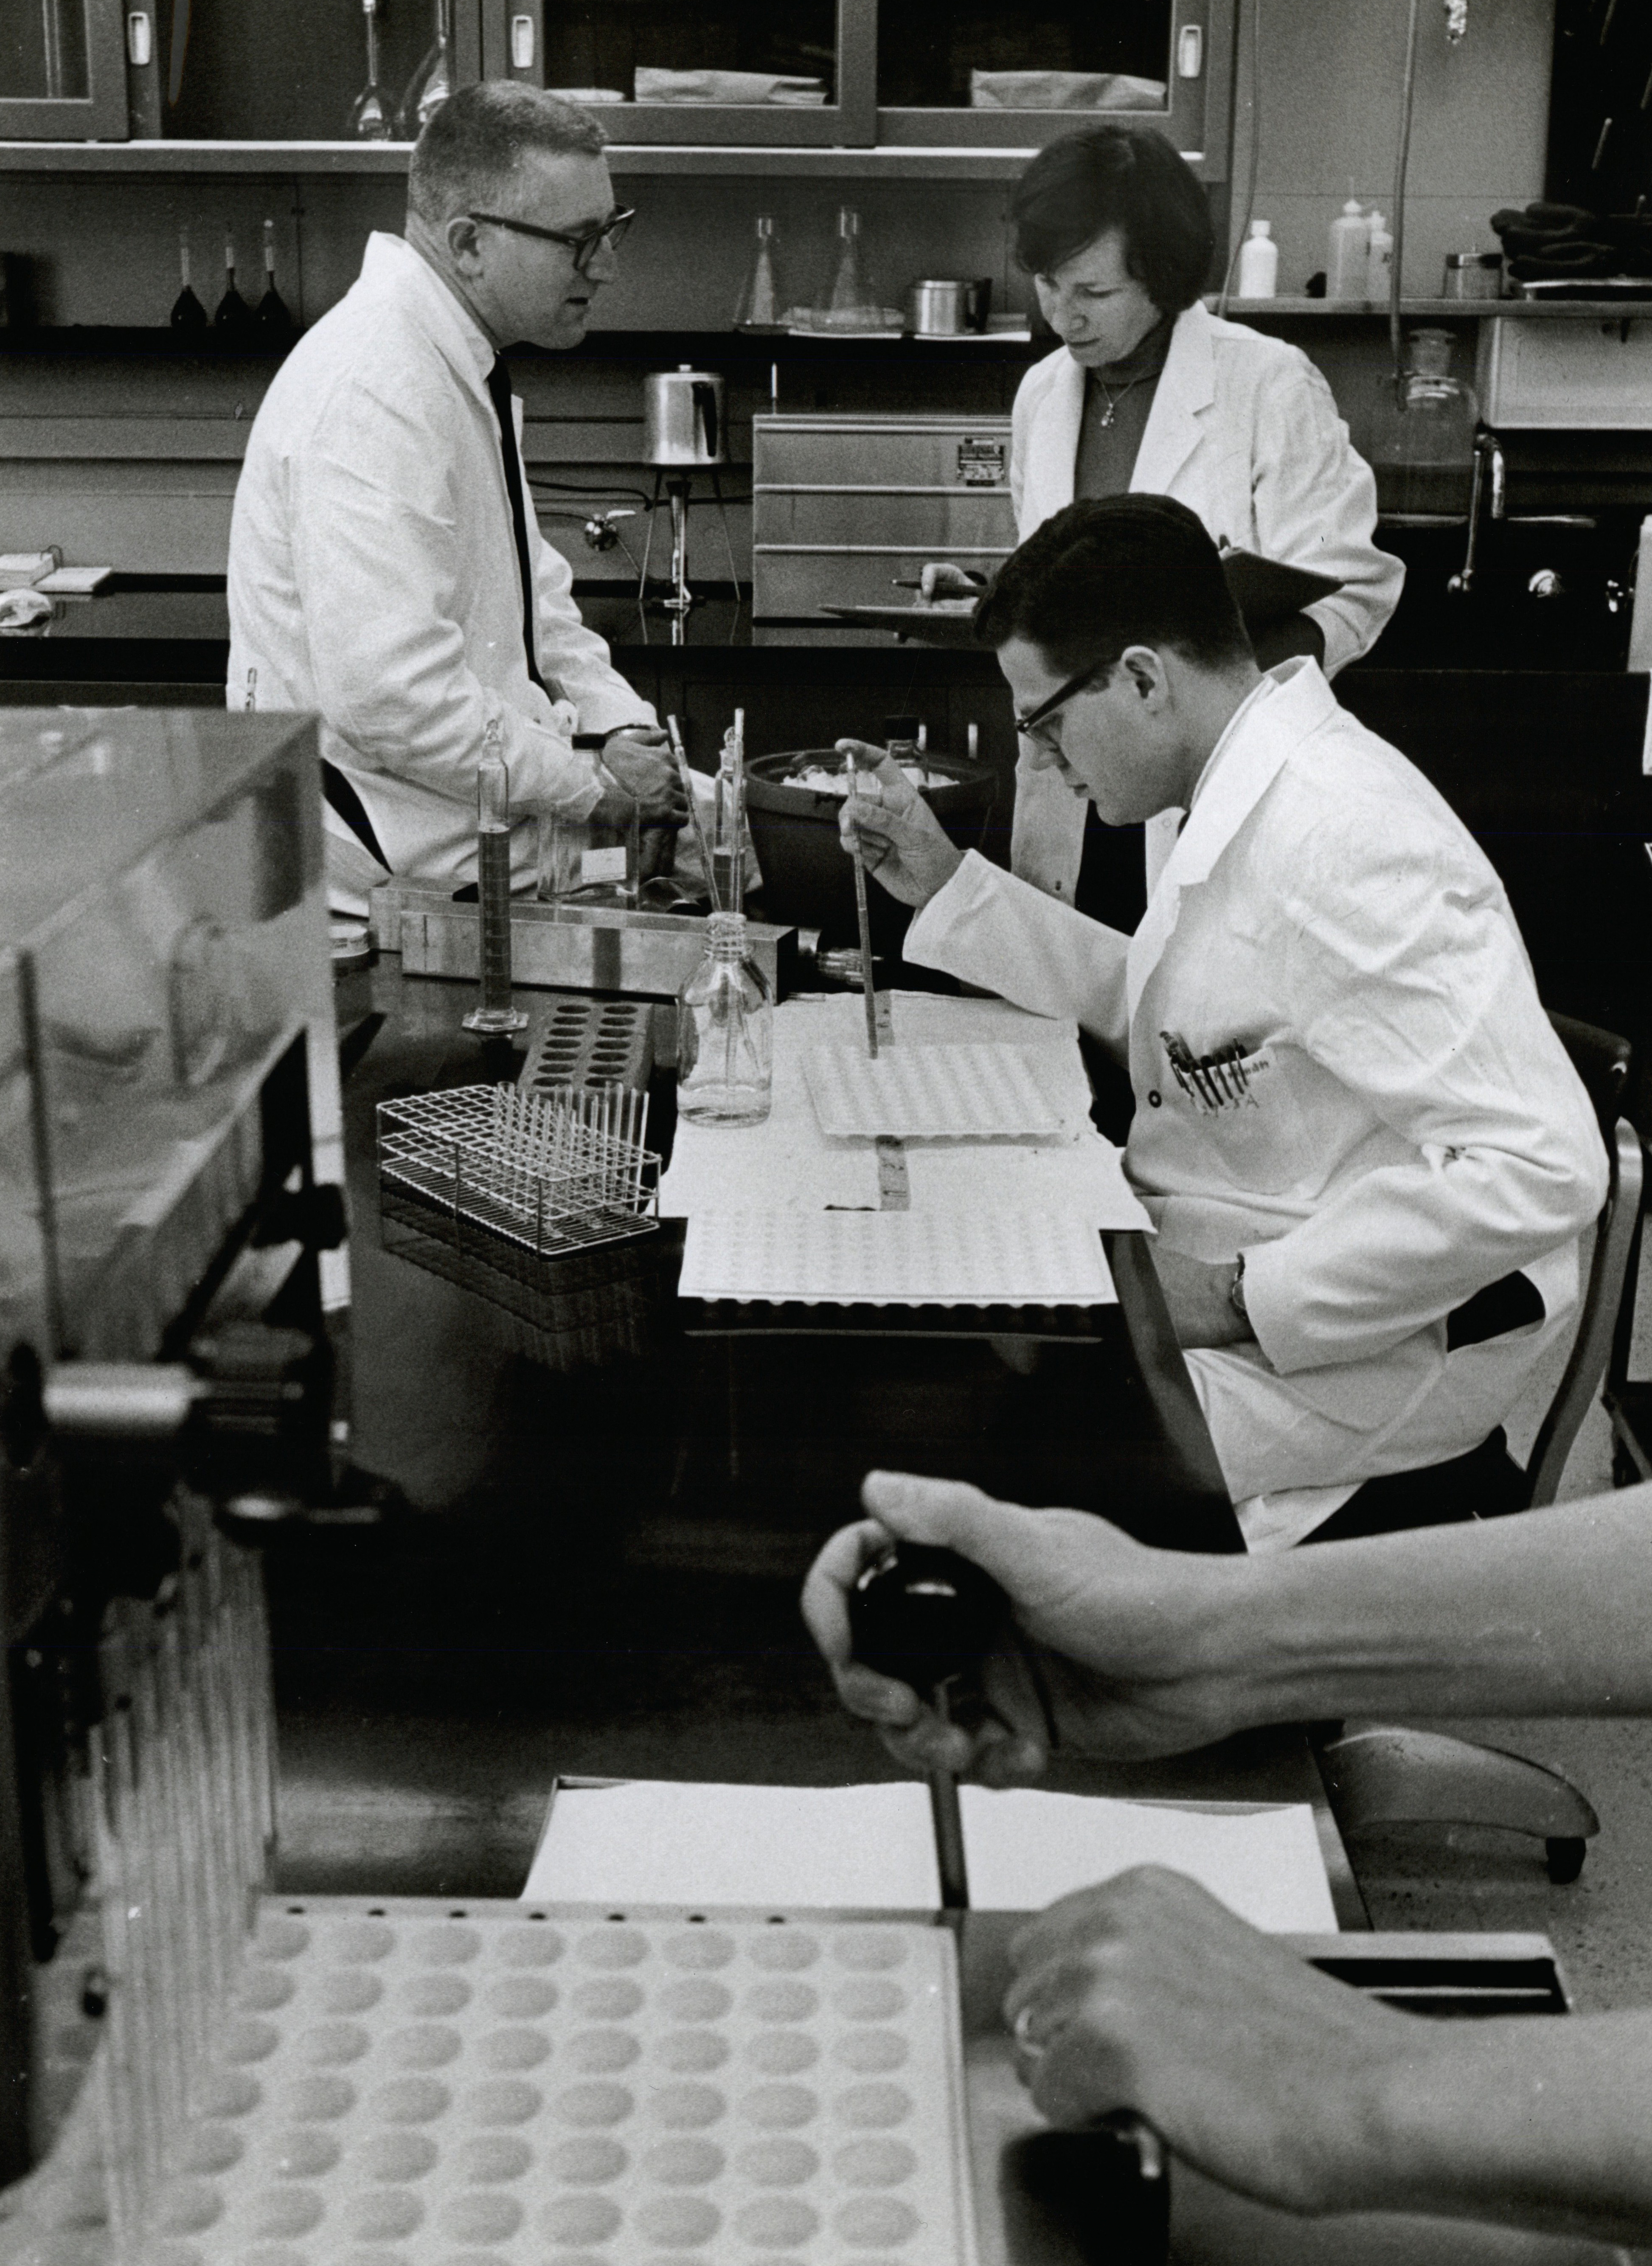 a black and white photo of one woman and two men working in a lab, wearing white lab coats